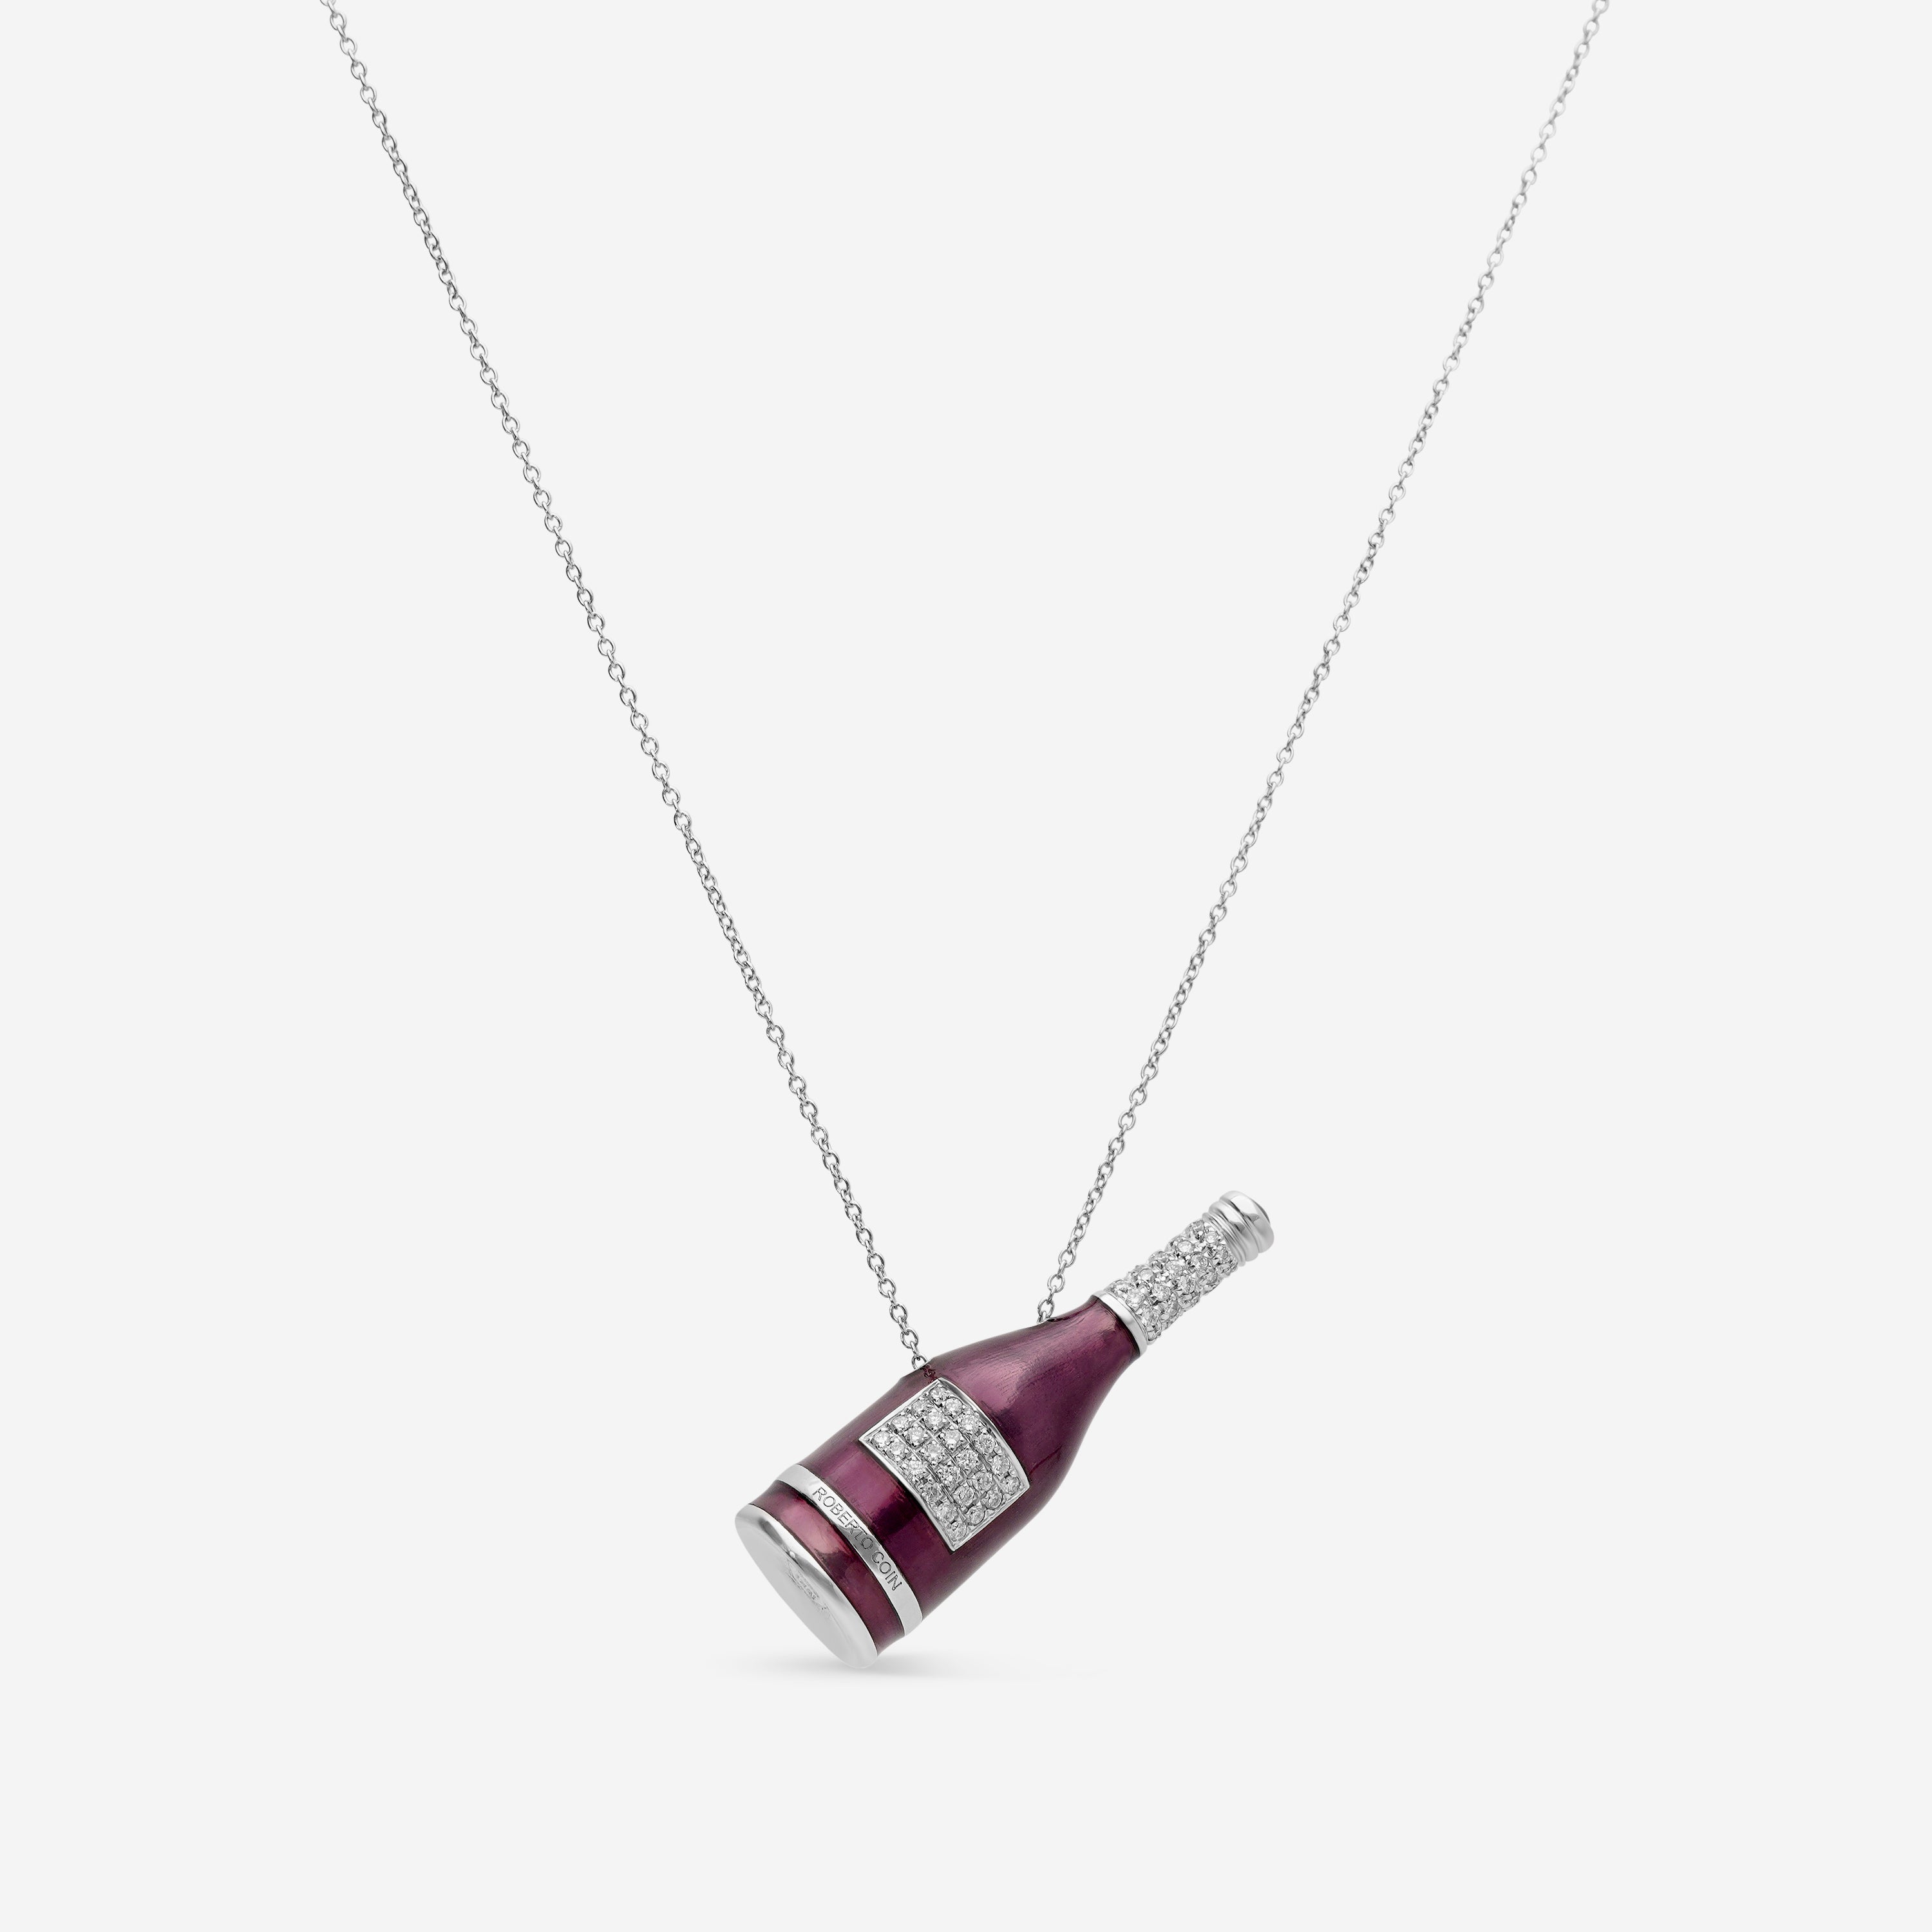 Roberto Coin 18k Gold, Diamond And Amethyst Champagne Bottle Pendant Necklace 228080aw18ax In White